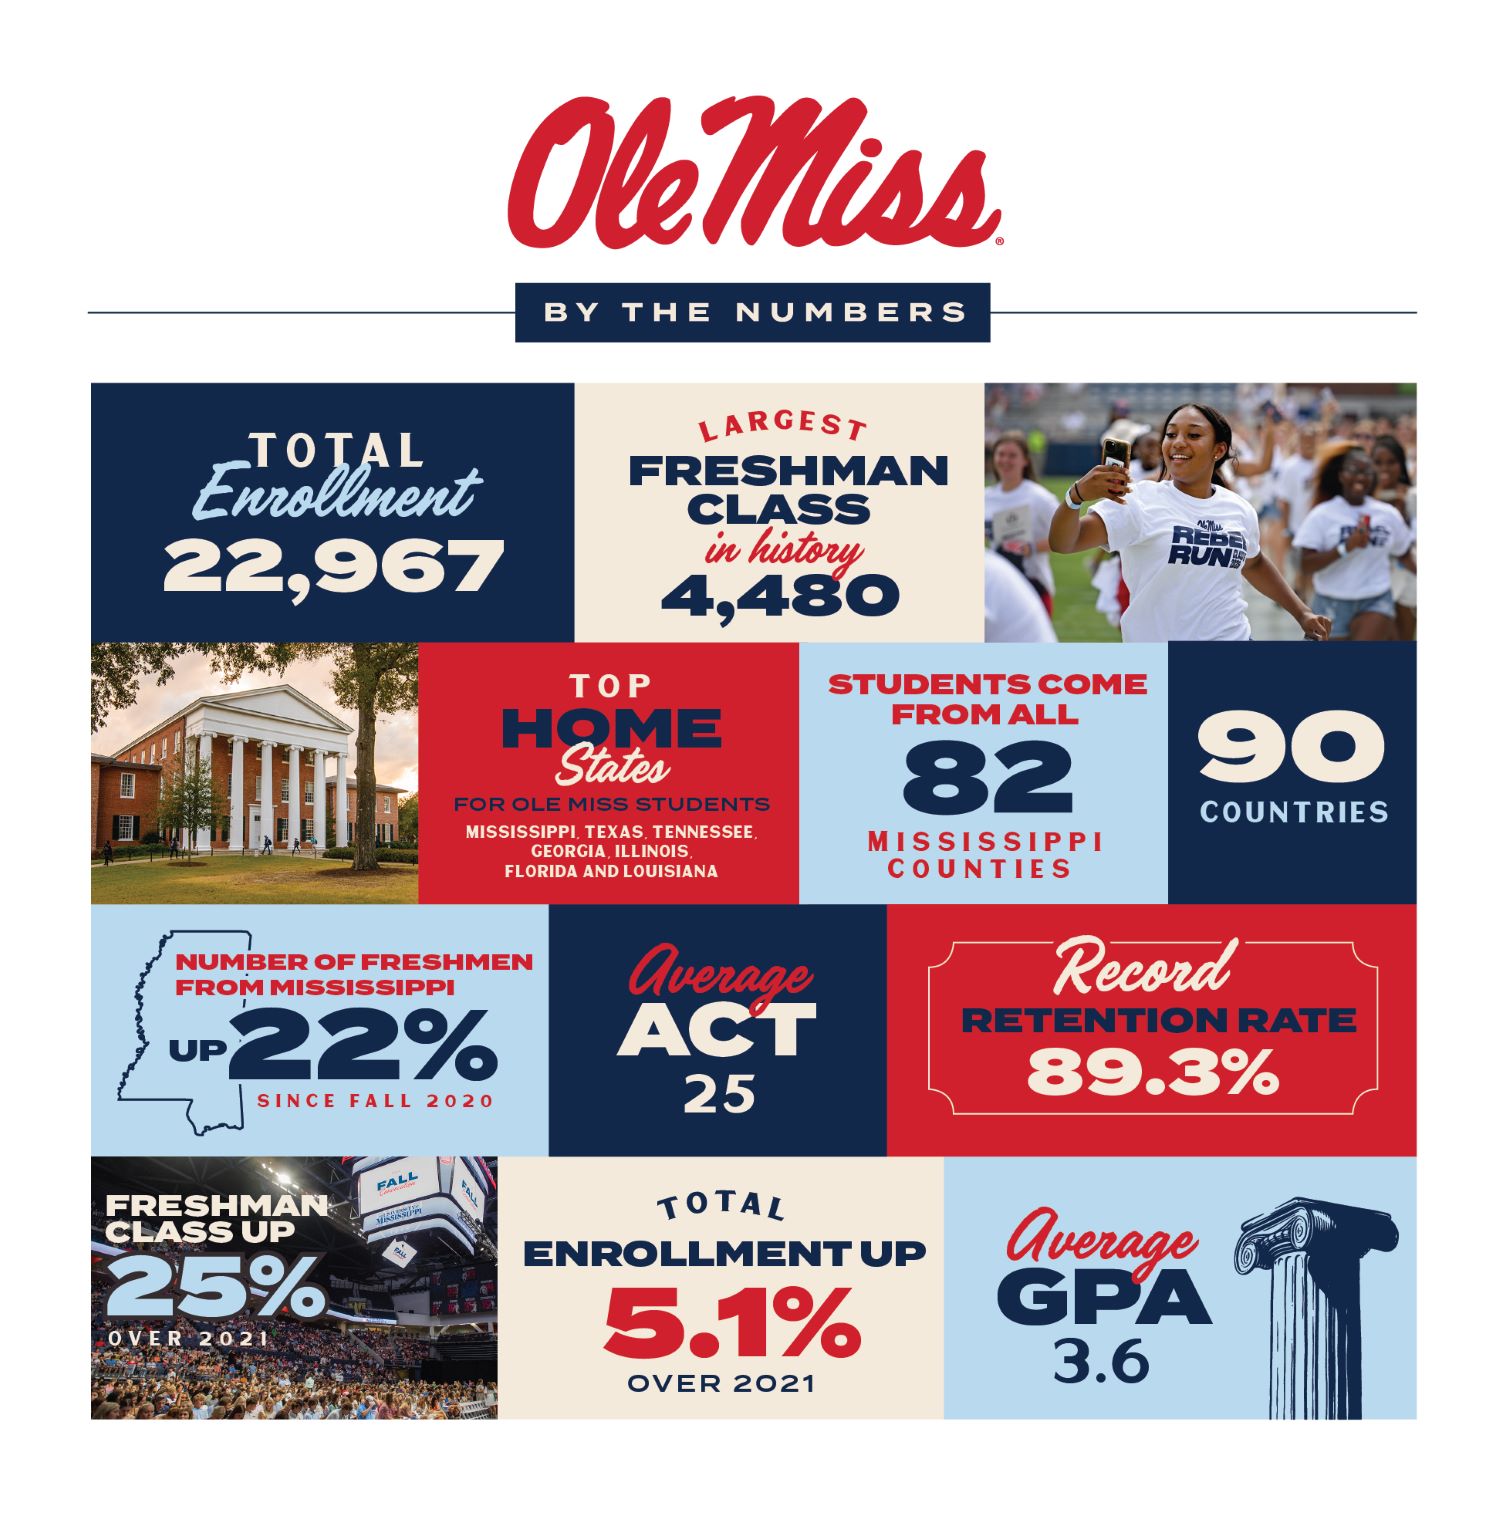 UM BY THE NUMBERS INFOGRAPHIC